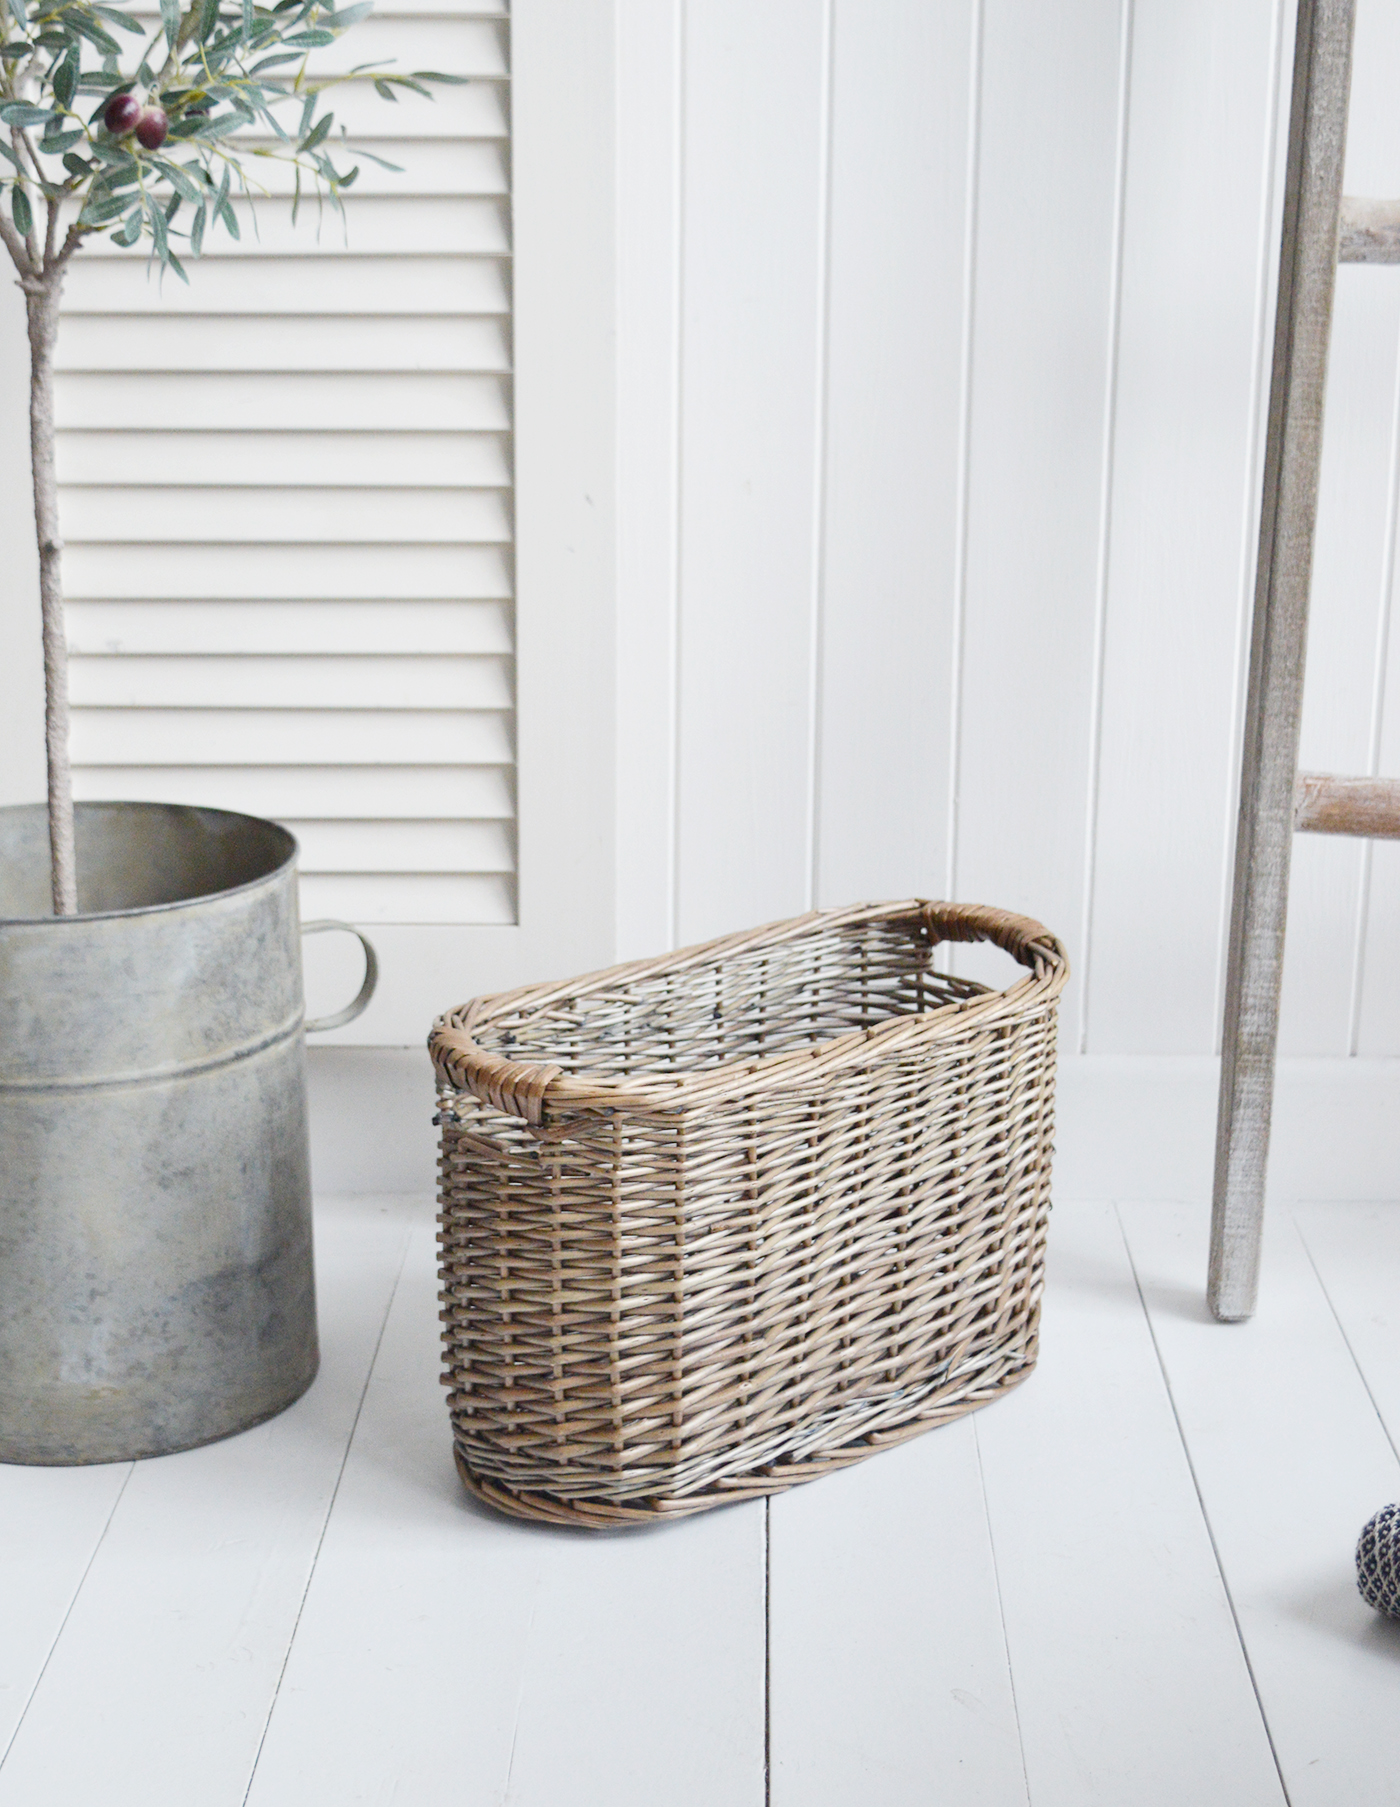 Harrow oval slim basket. Ideal Toilet roll storage or for throws beside the sofa from The White Lighthouse Furniture. New England, country, coastal, farmhouse city and whie home interiors. Hallway, Bedroom , Bathroom and living room